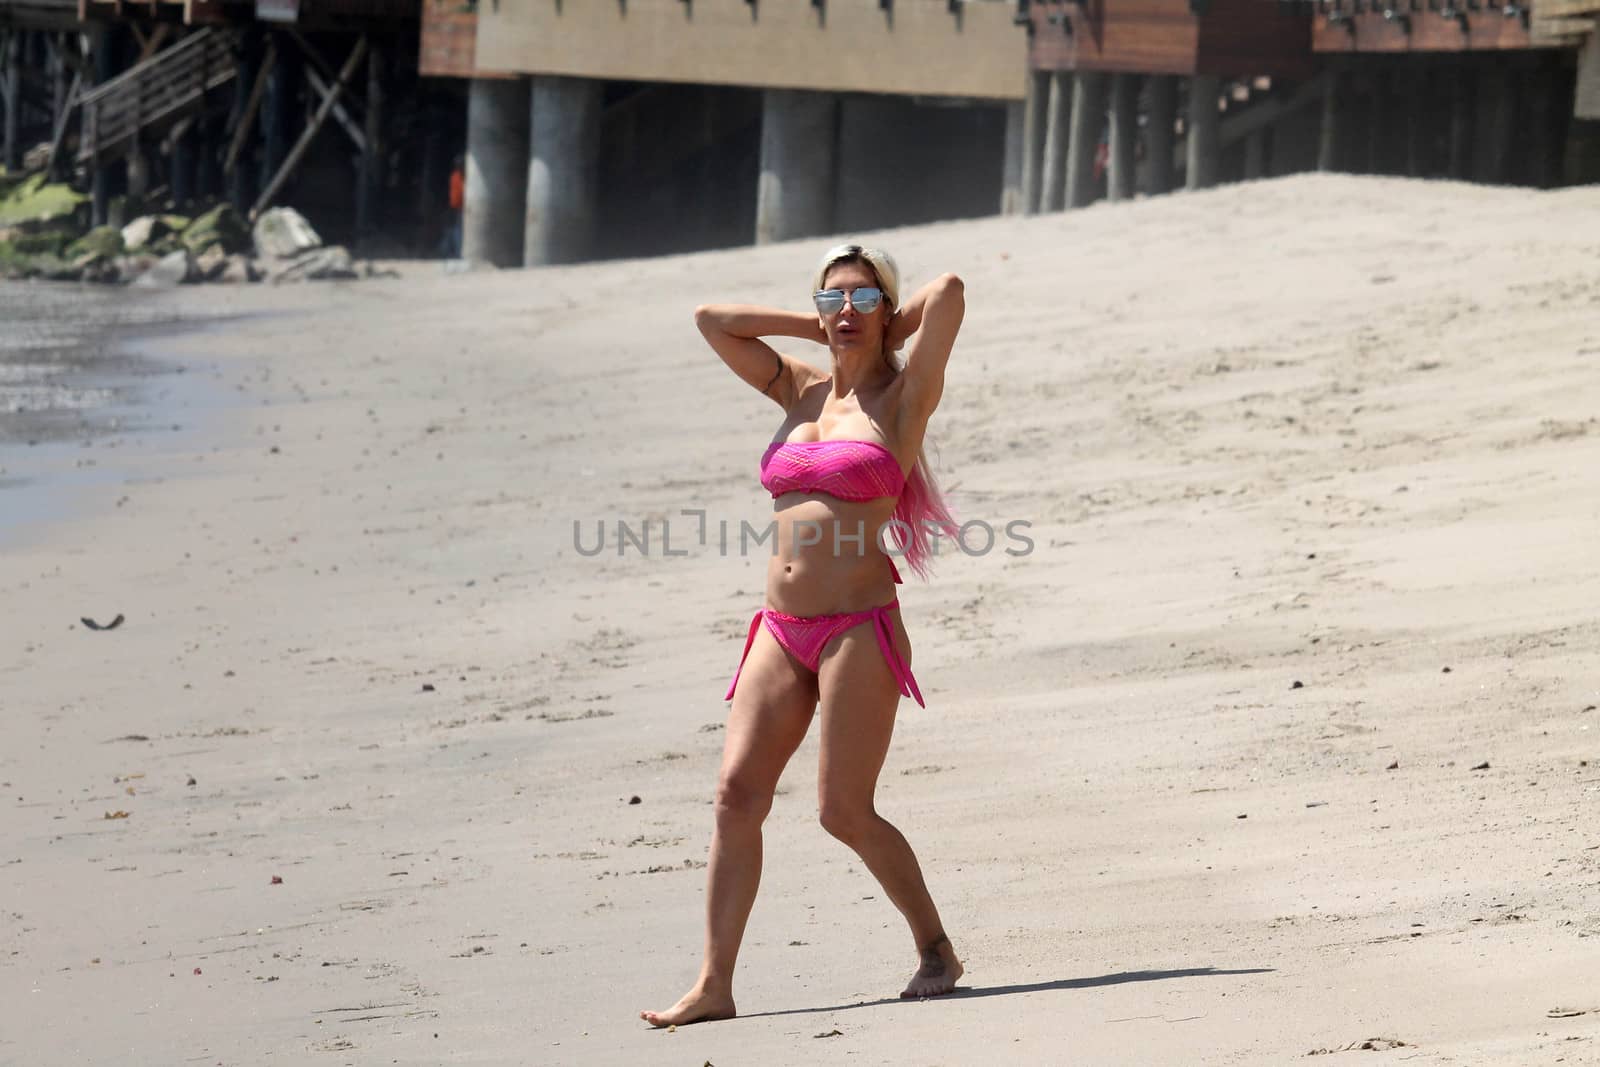 Frenchy Morgan the "Celebrity Big Brother" Star is spotted doing yoga and karate on the beach while wearing a tiny pink bikini, Malibu, CA 04-21-17/ImageCollect by ImageCollect